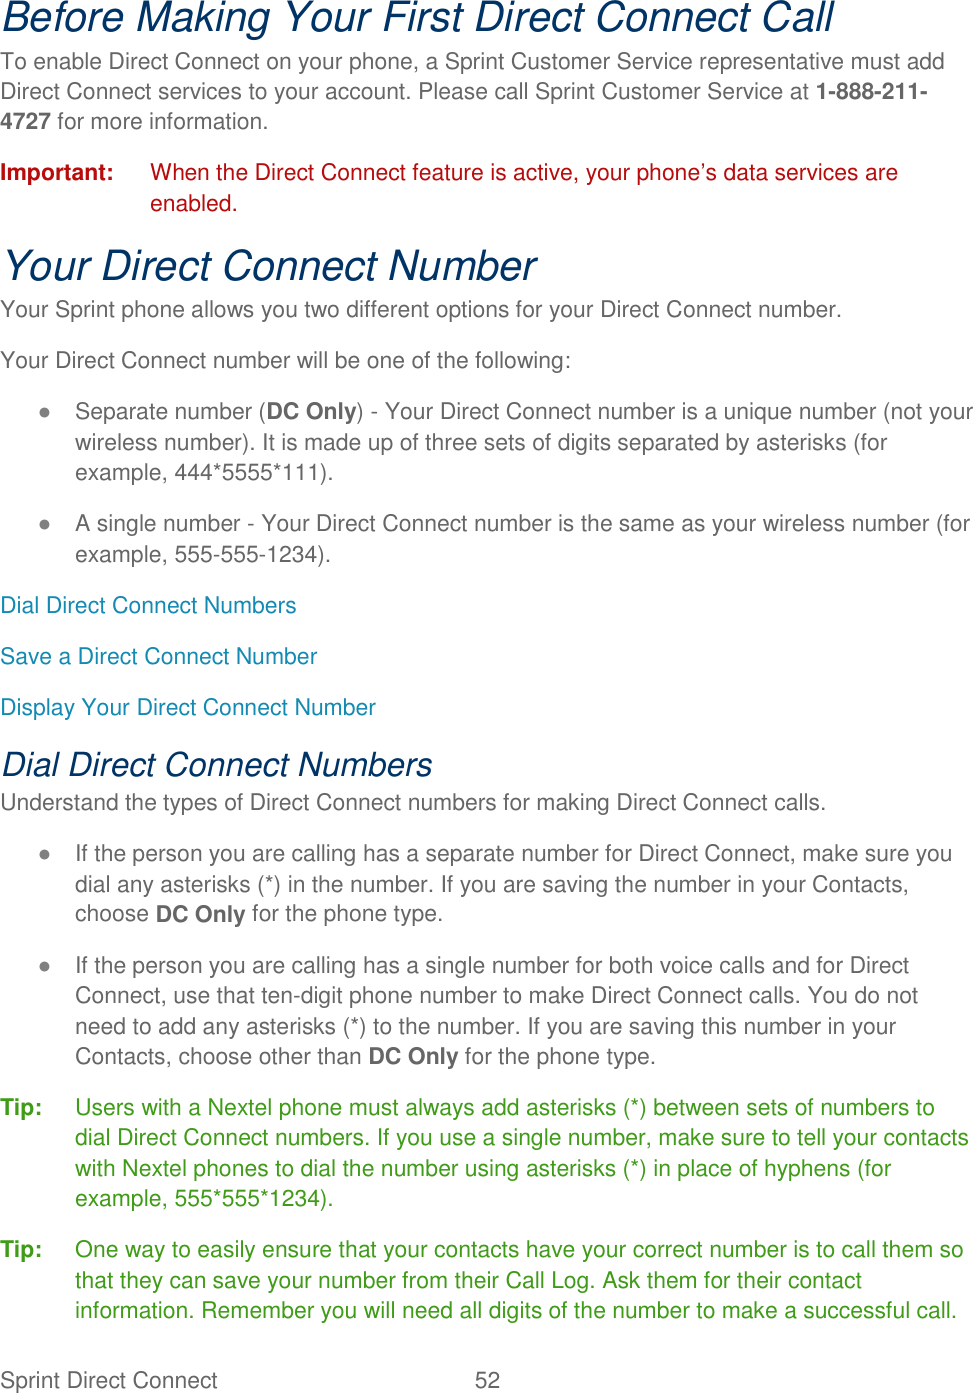 Sprint Direct Connect  52   Before Making Your First Direct Connect Call To enable Direct Connect on your phone, a Sprint Customer Service representative must add Direct Connect services to your account. Please call Sprint Customer Service at 1-888-211-4727 for more information. Important:  When the Direct Connect feature is active, your phone’s data services are enabled. Your Direct Connect Number Your Sprint phone allows you two different options for your Direct Connect number. Your Direct Connect number will be one of the following: ● Separate number (DC Only) - Your Direct Connect number is a unique number (not your wireless number). It is made up of three sets of digits separated by asterisks (for example, 444*5555*111). ● A single number - Your Direct Connect number is the same as your wireless number (for example, 555-555-1234). Dial Direct Connect Numbers Save a Direct Connect Number Display Your Direct Connect Number Dial Direct Connect Numbers Understand the types of Direct Connect numbers for making Direct Connect calls. ● If the person you are calling has a separate number for Direct Connect, make sure you dial any asterisks (*) in the number. If you are saving the number in your Contacts, choose DC Only for the phone type. ● If the person you are calling has a single number for both voice calls and for Direct Connect, use that ten-digit phone number to make Direct Connect calls. You do not need to add any asterisks (*) to the number. If you are saving this number in your Contacts, choose other than DC Only for the phone type. Tip:  Users with a Nextel phone must always add asterisks (*) between sets of numbers to dial Direct Connect numbers. If you use a single number, make sure to tell your contacts with Nextel phones to dial the number using asterisks (*) in place of hyphens (for example, 555*555*1234). Tip:  One way to easily ensure that your contacts have your correct number is to call them so that they can save your number from their Call Log. Ask them for their contact information. Remember you will need all digits of the number to make a successful call. 